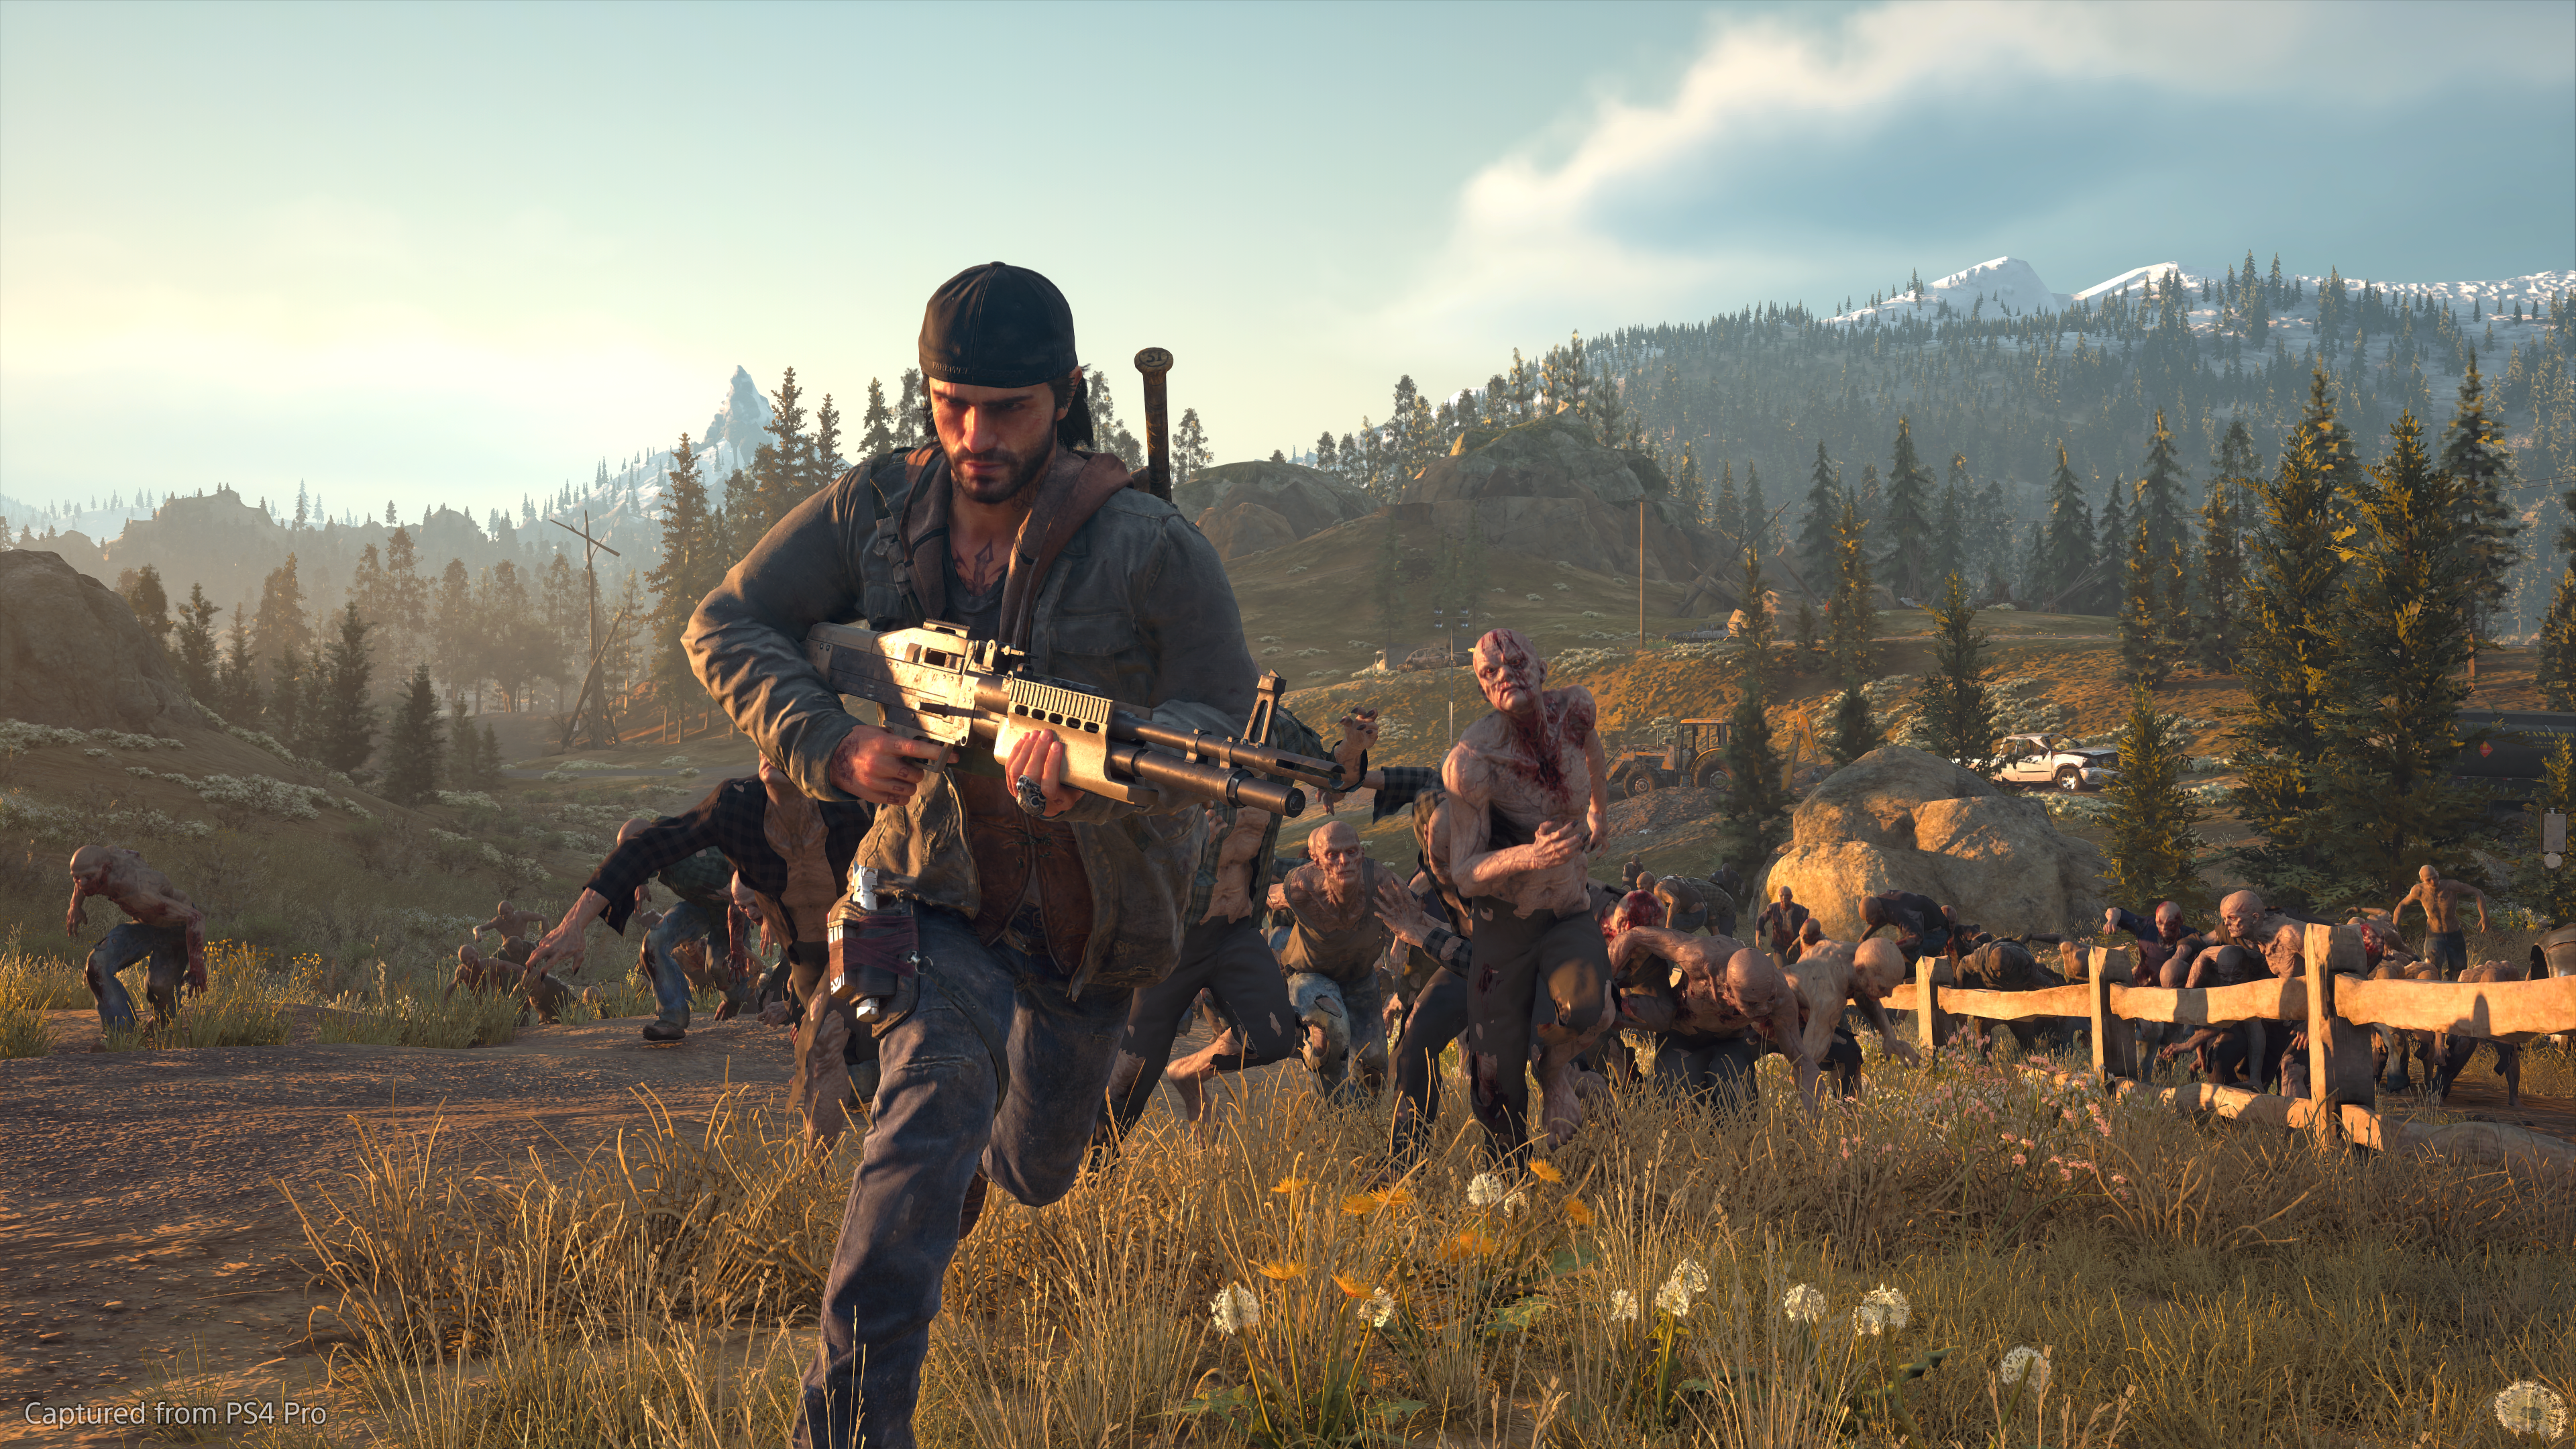 4 life игра. Days gone. Days gone ps4. Days gone 2. Игра Days gone.